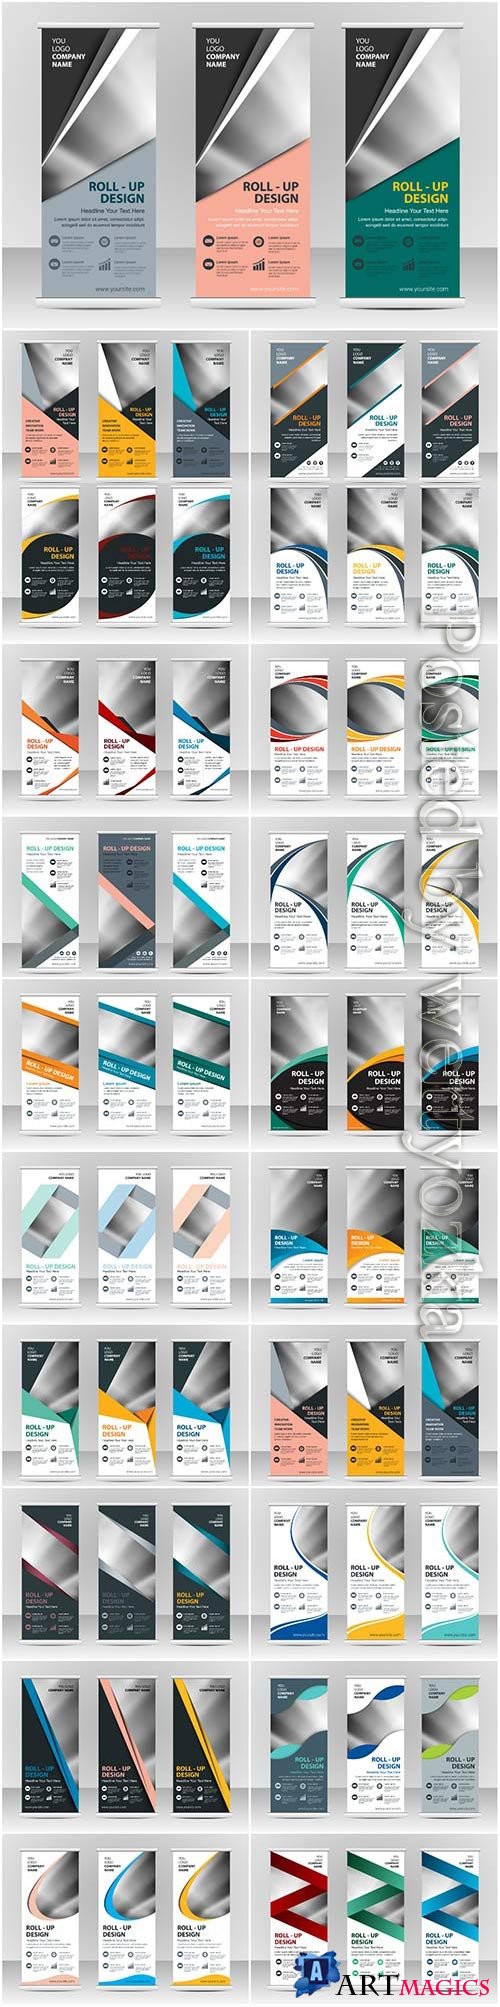 Vertical business banners in vector